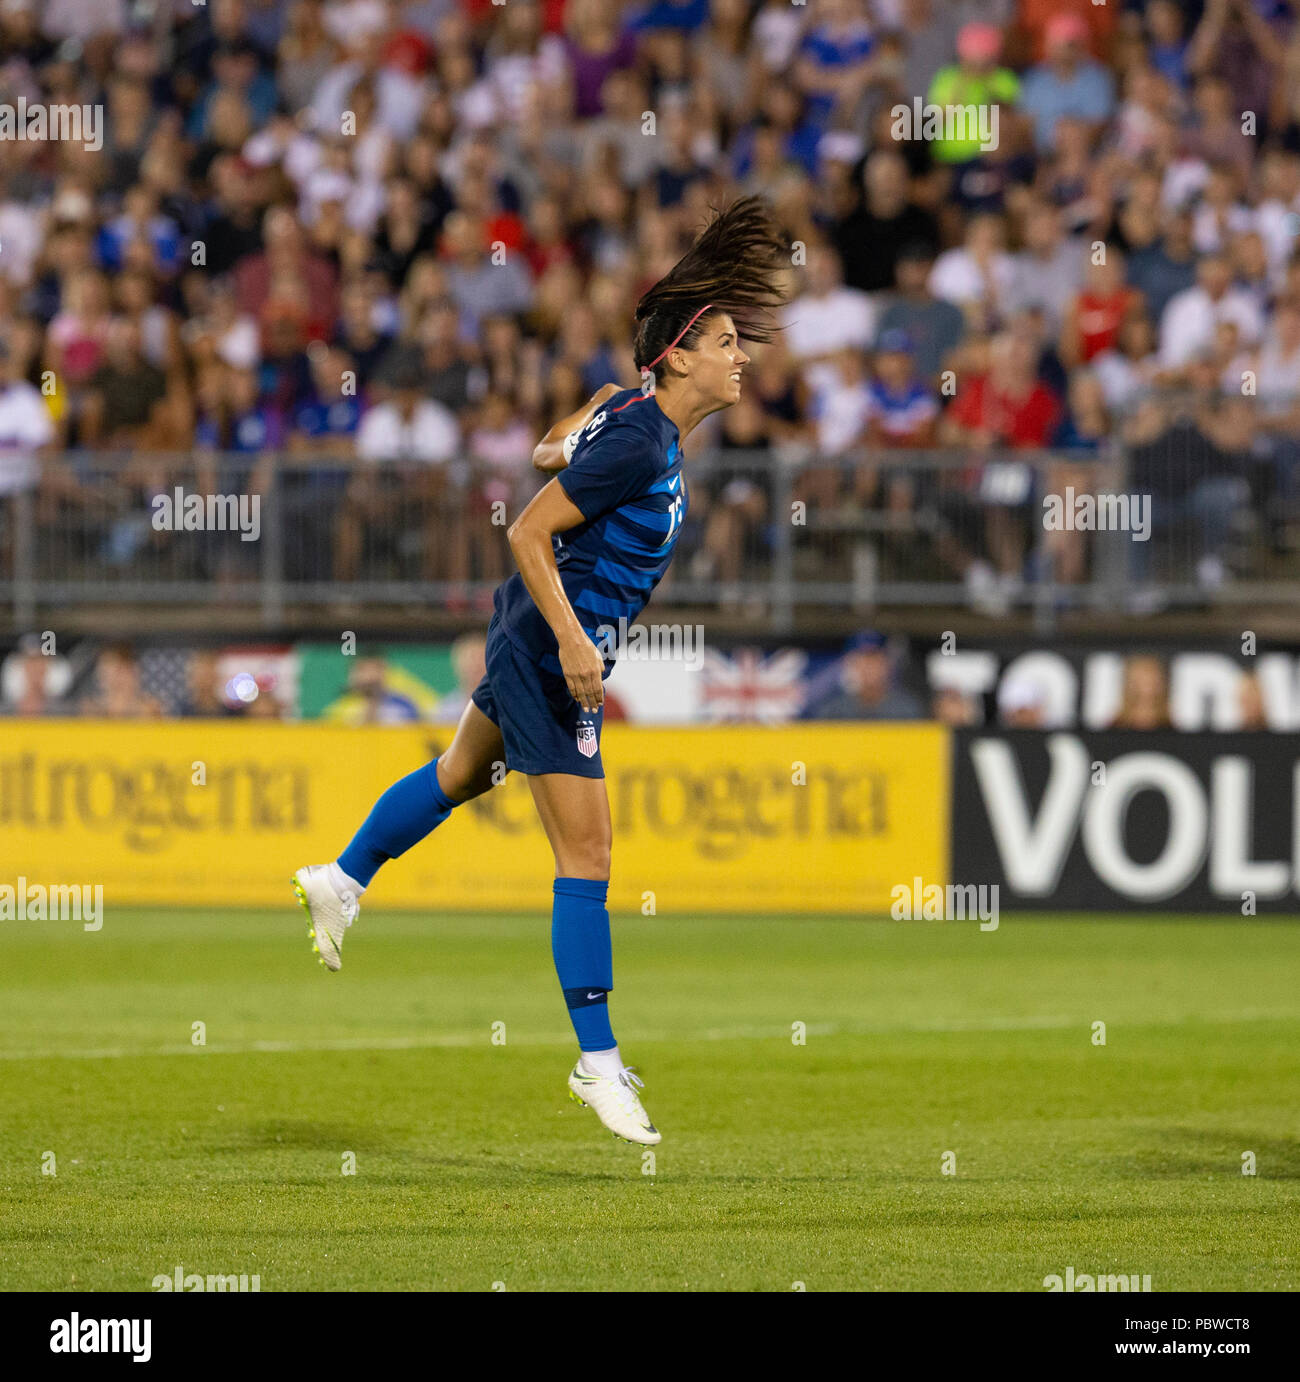 East Hartford, Connecticut, USA. July 29, 2018: Alex Morgan (13) of USA kicks ball during Tournament of Nations game against Australia at Pratt & Whitney stadium Game ended in draw 1 - 1 Credit: lev radin/Alamy Live News Stock Photo